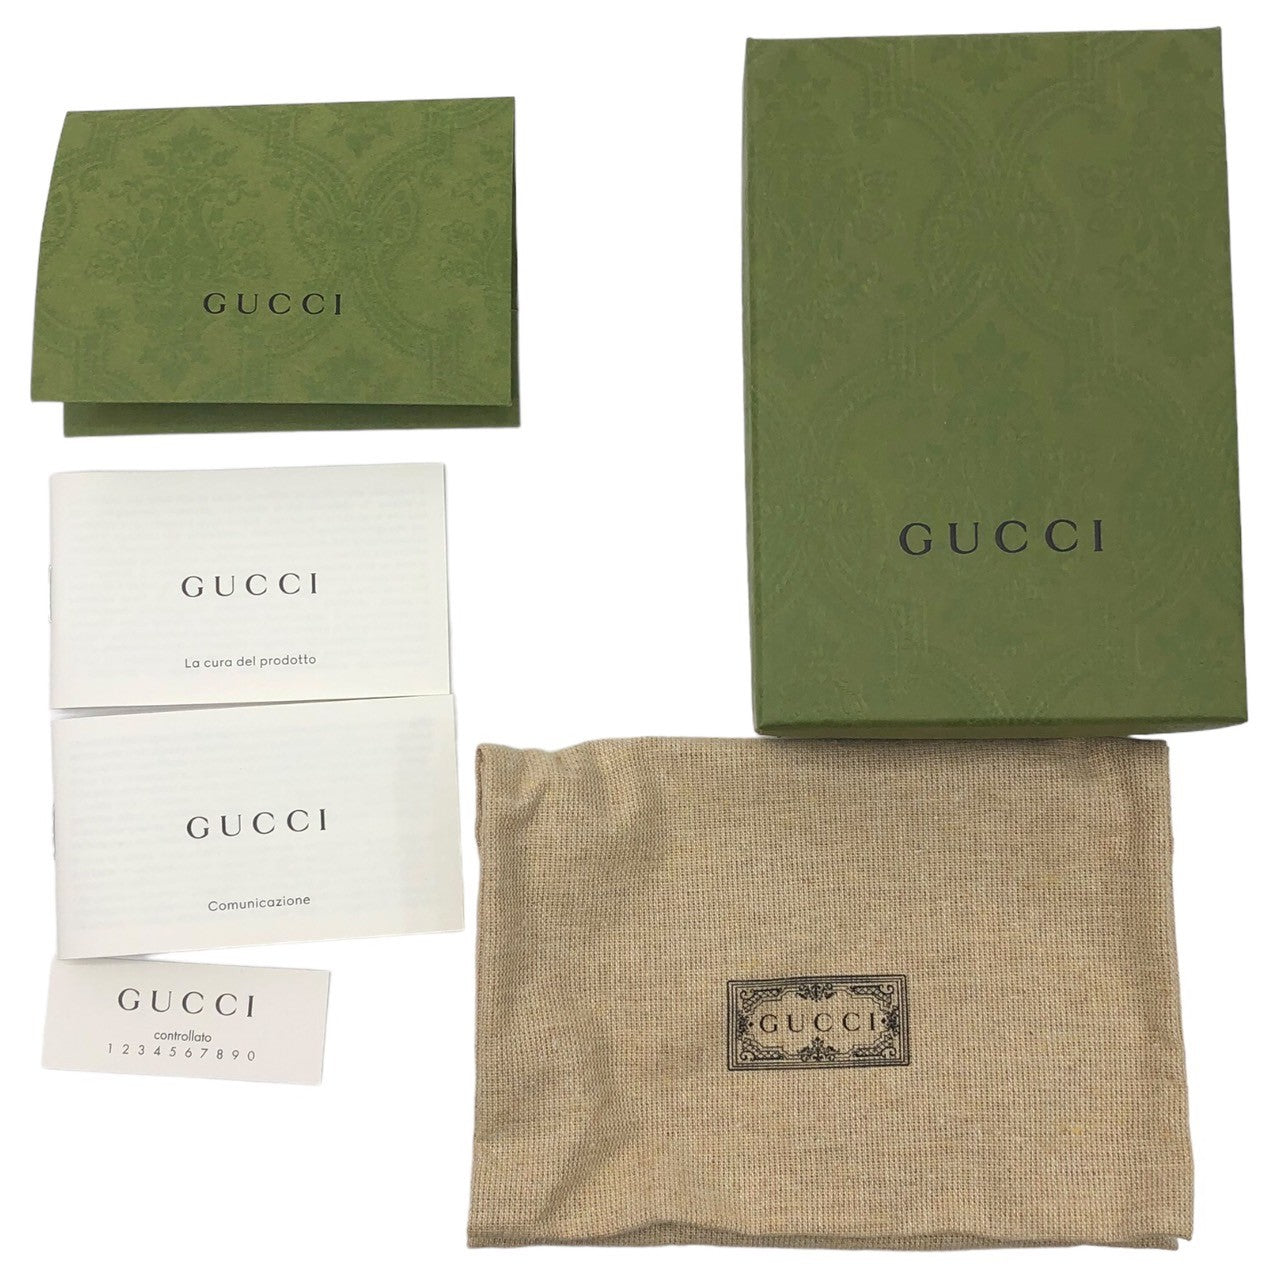 GUCCI(グッチ) GG marmont python leather compact wallet GG マーモント パイソン レザー コンパクト ウォレット 4561260・416 グリーン 購入証明書付